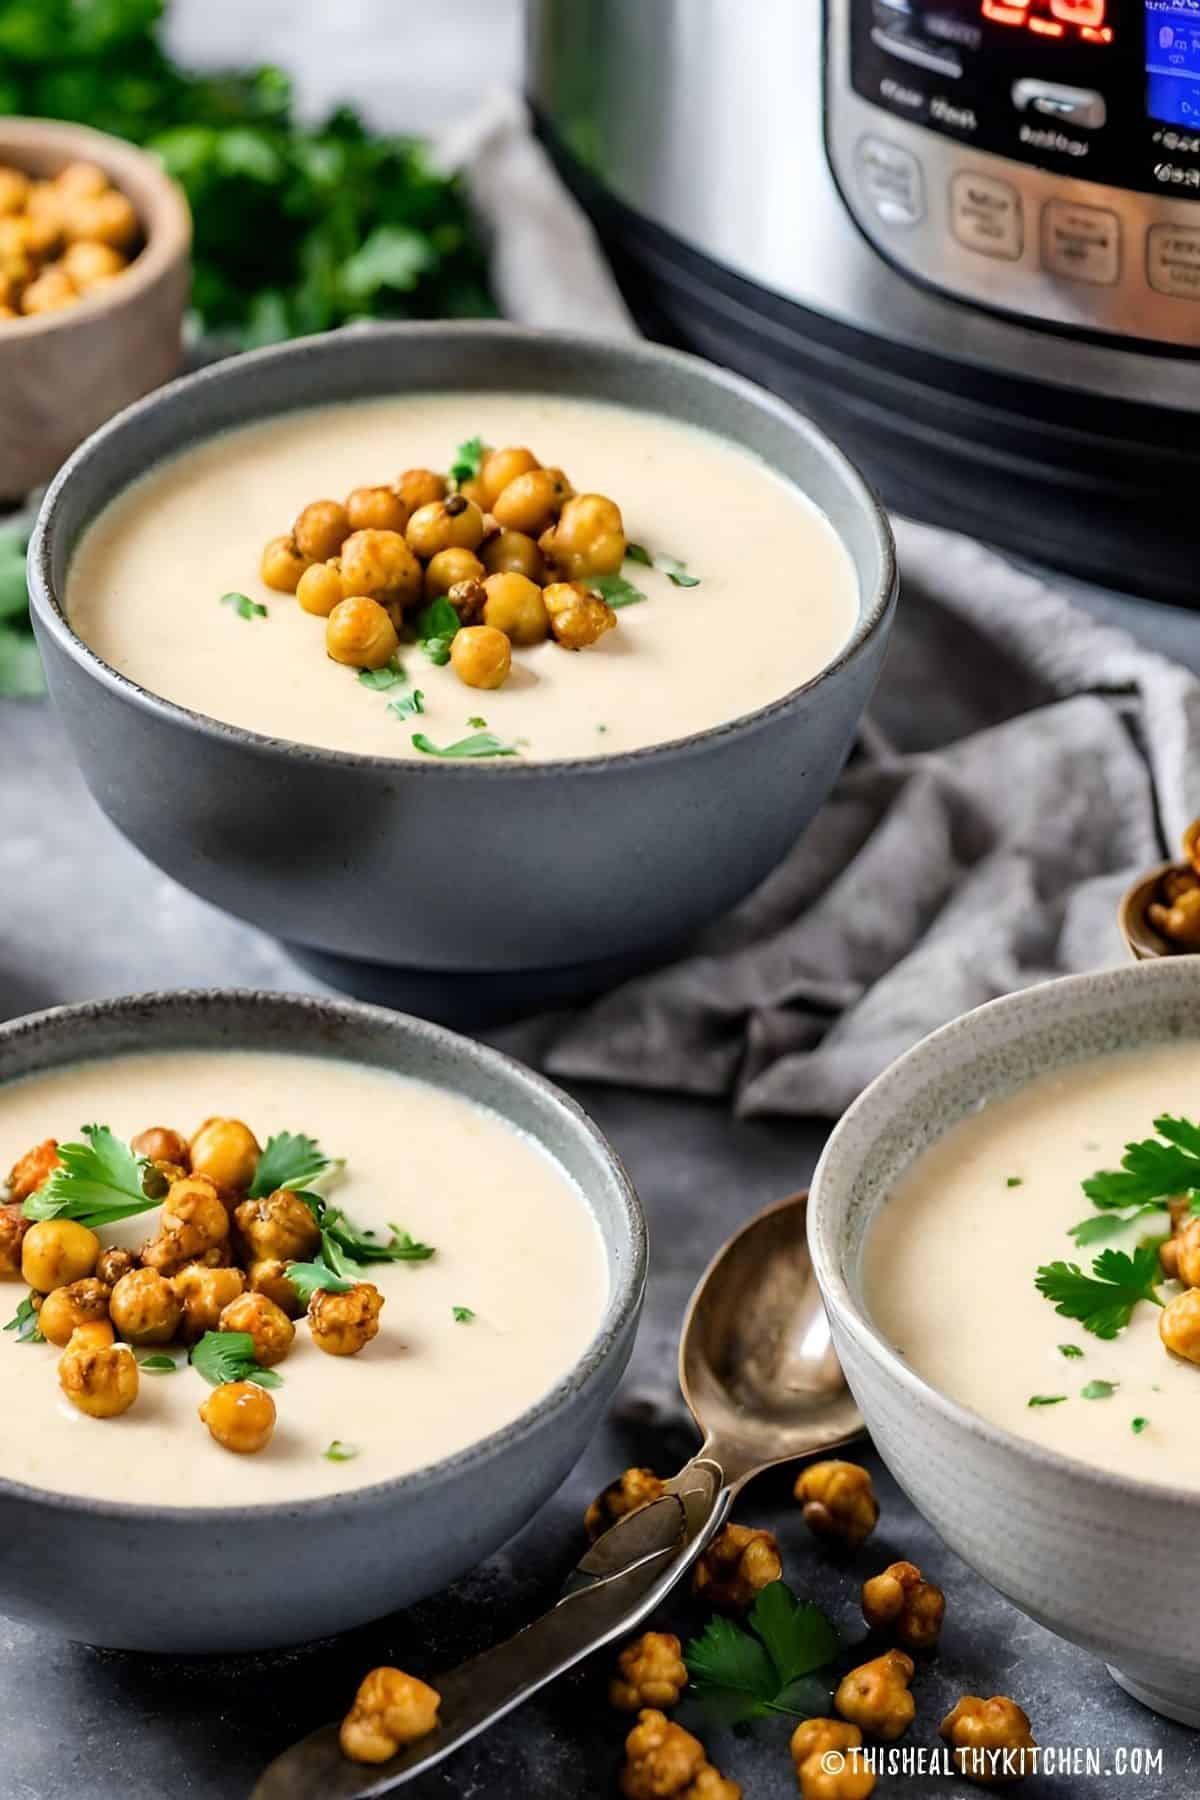 Bowls of cauliflower soup with roasted chickpeas on top and Instant Pot in background.